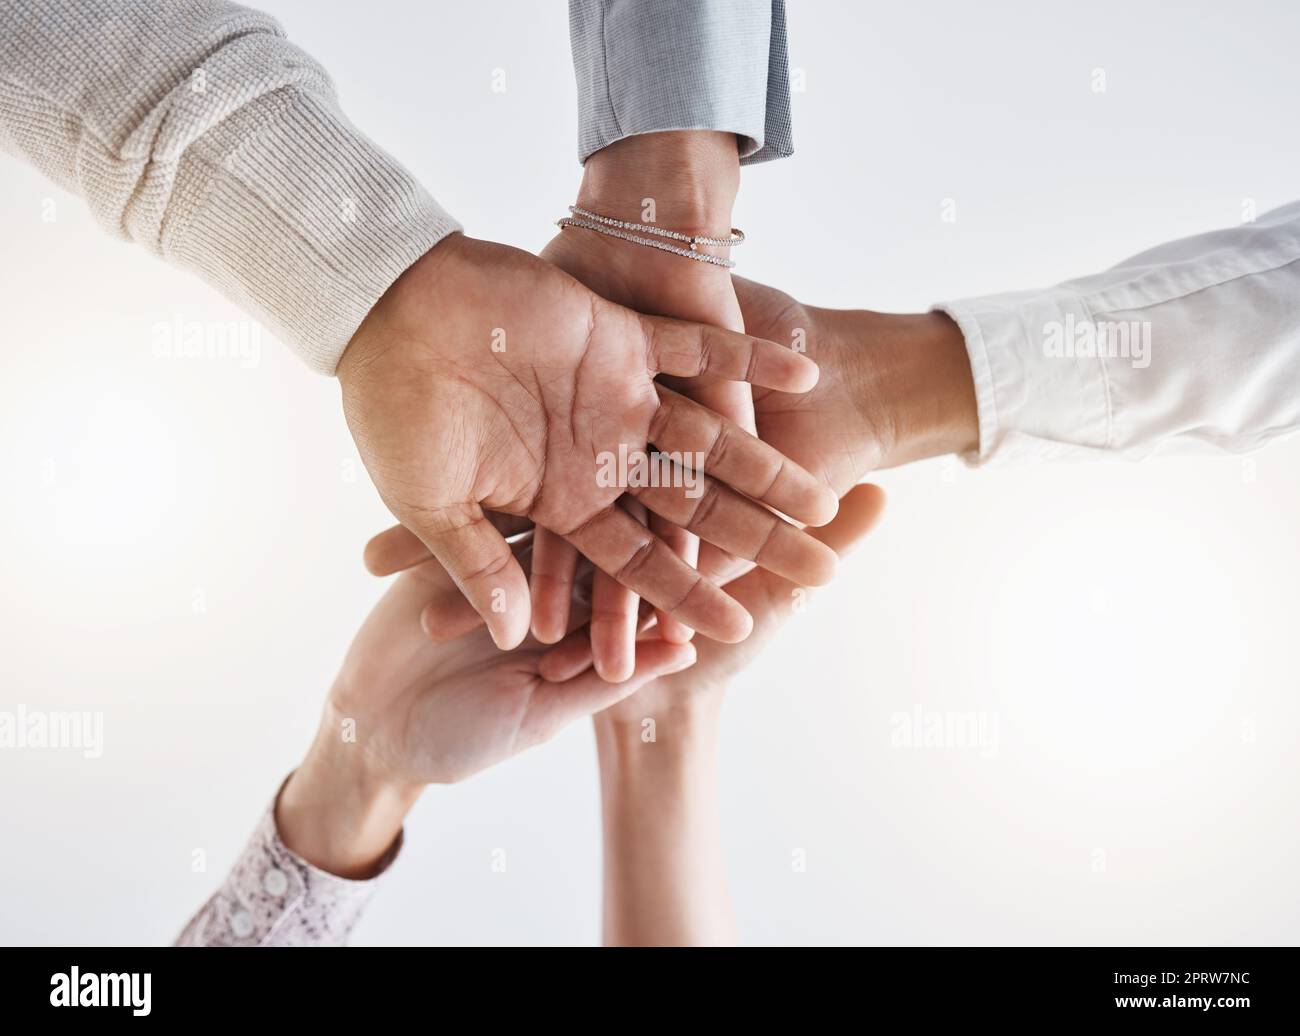 Teamwork hands, partnership and collaboration support for winner, motivation and vision of goals. Below business group people connect in trust, success commitment and working for solidarity together Stock Photo